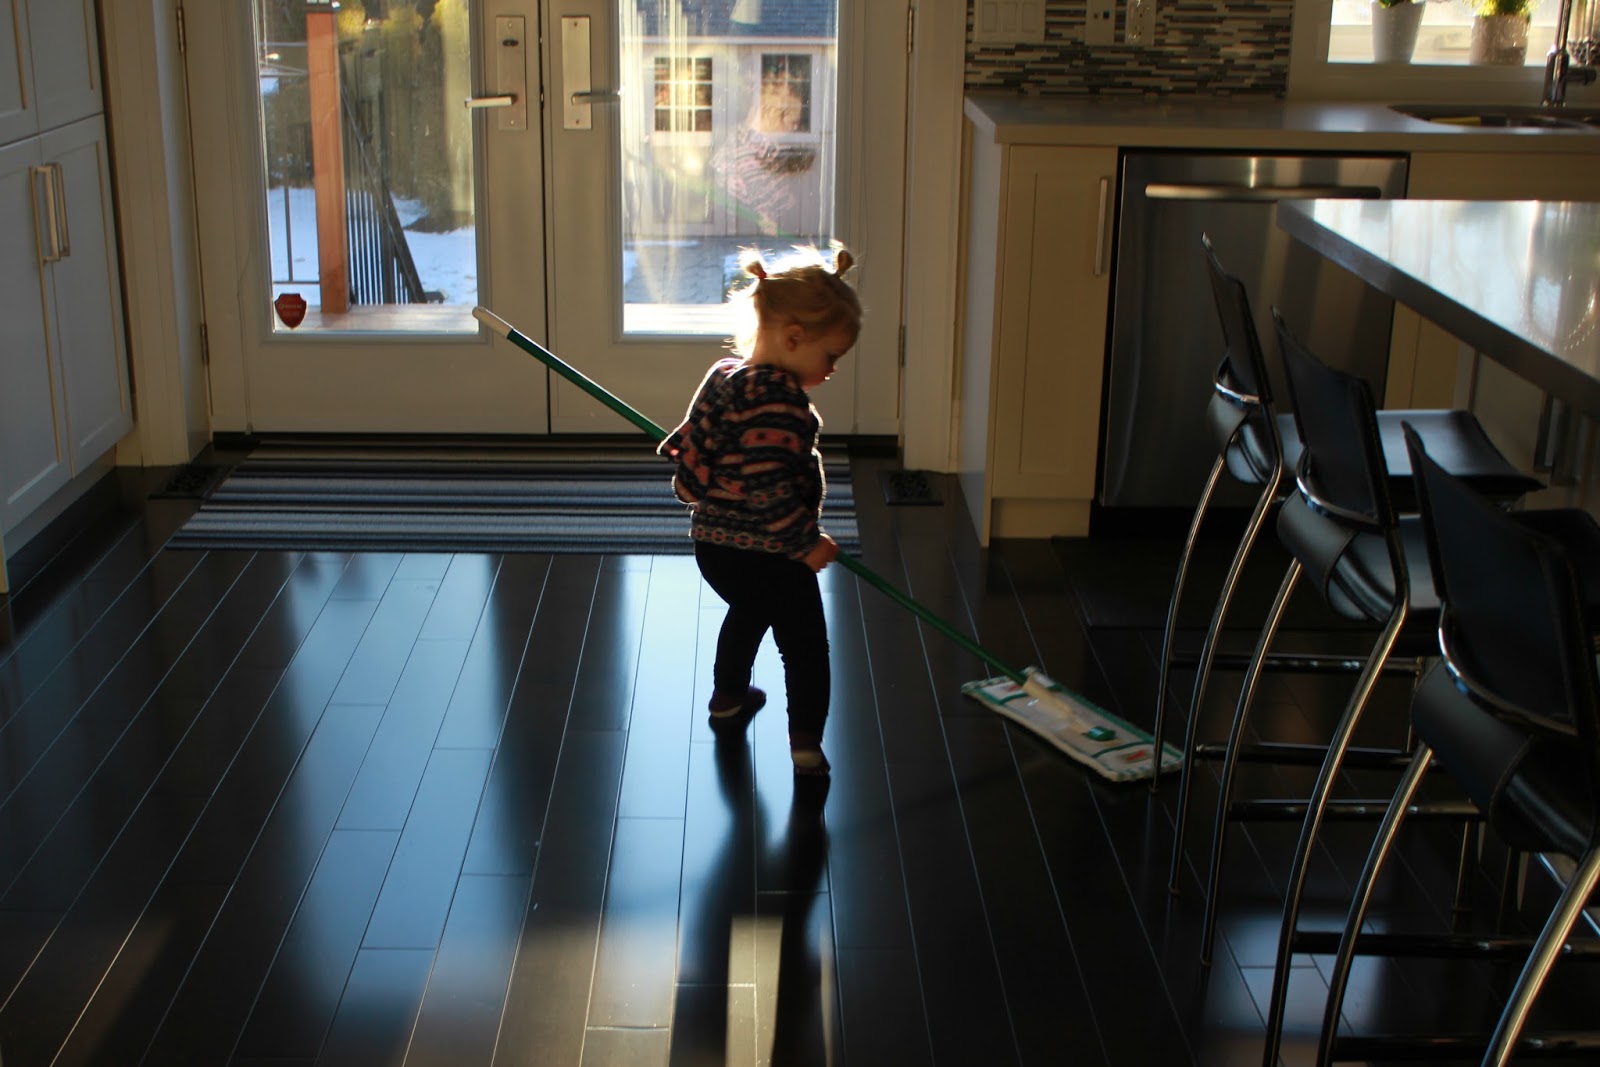 Spring Cleaning with a Toddler